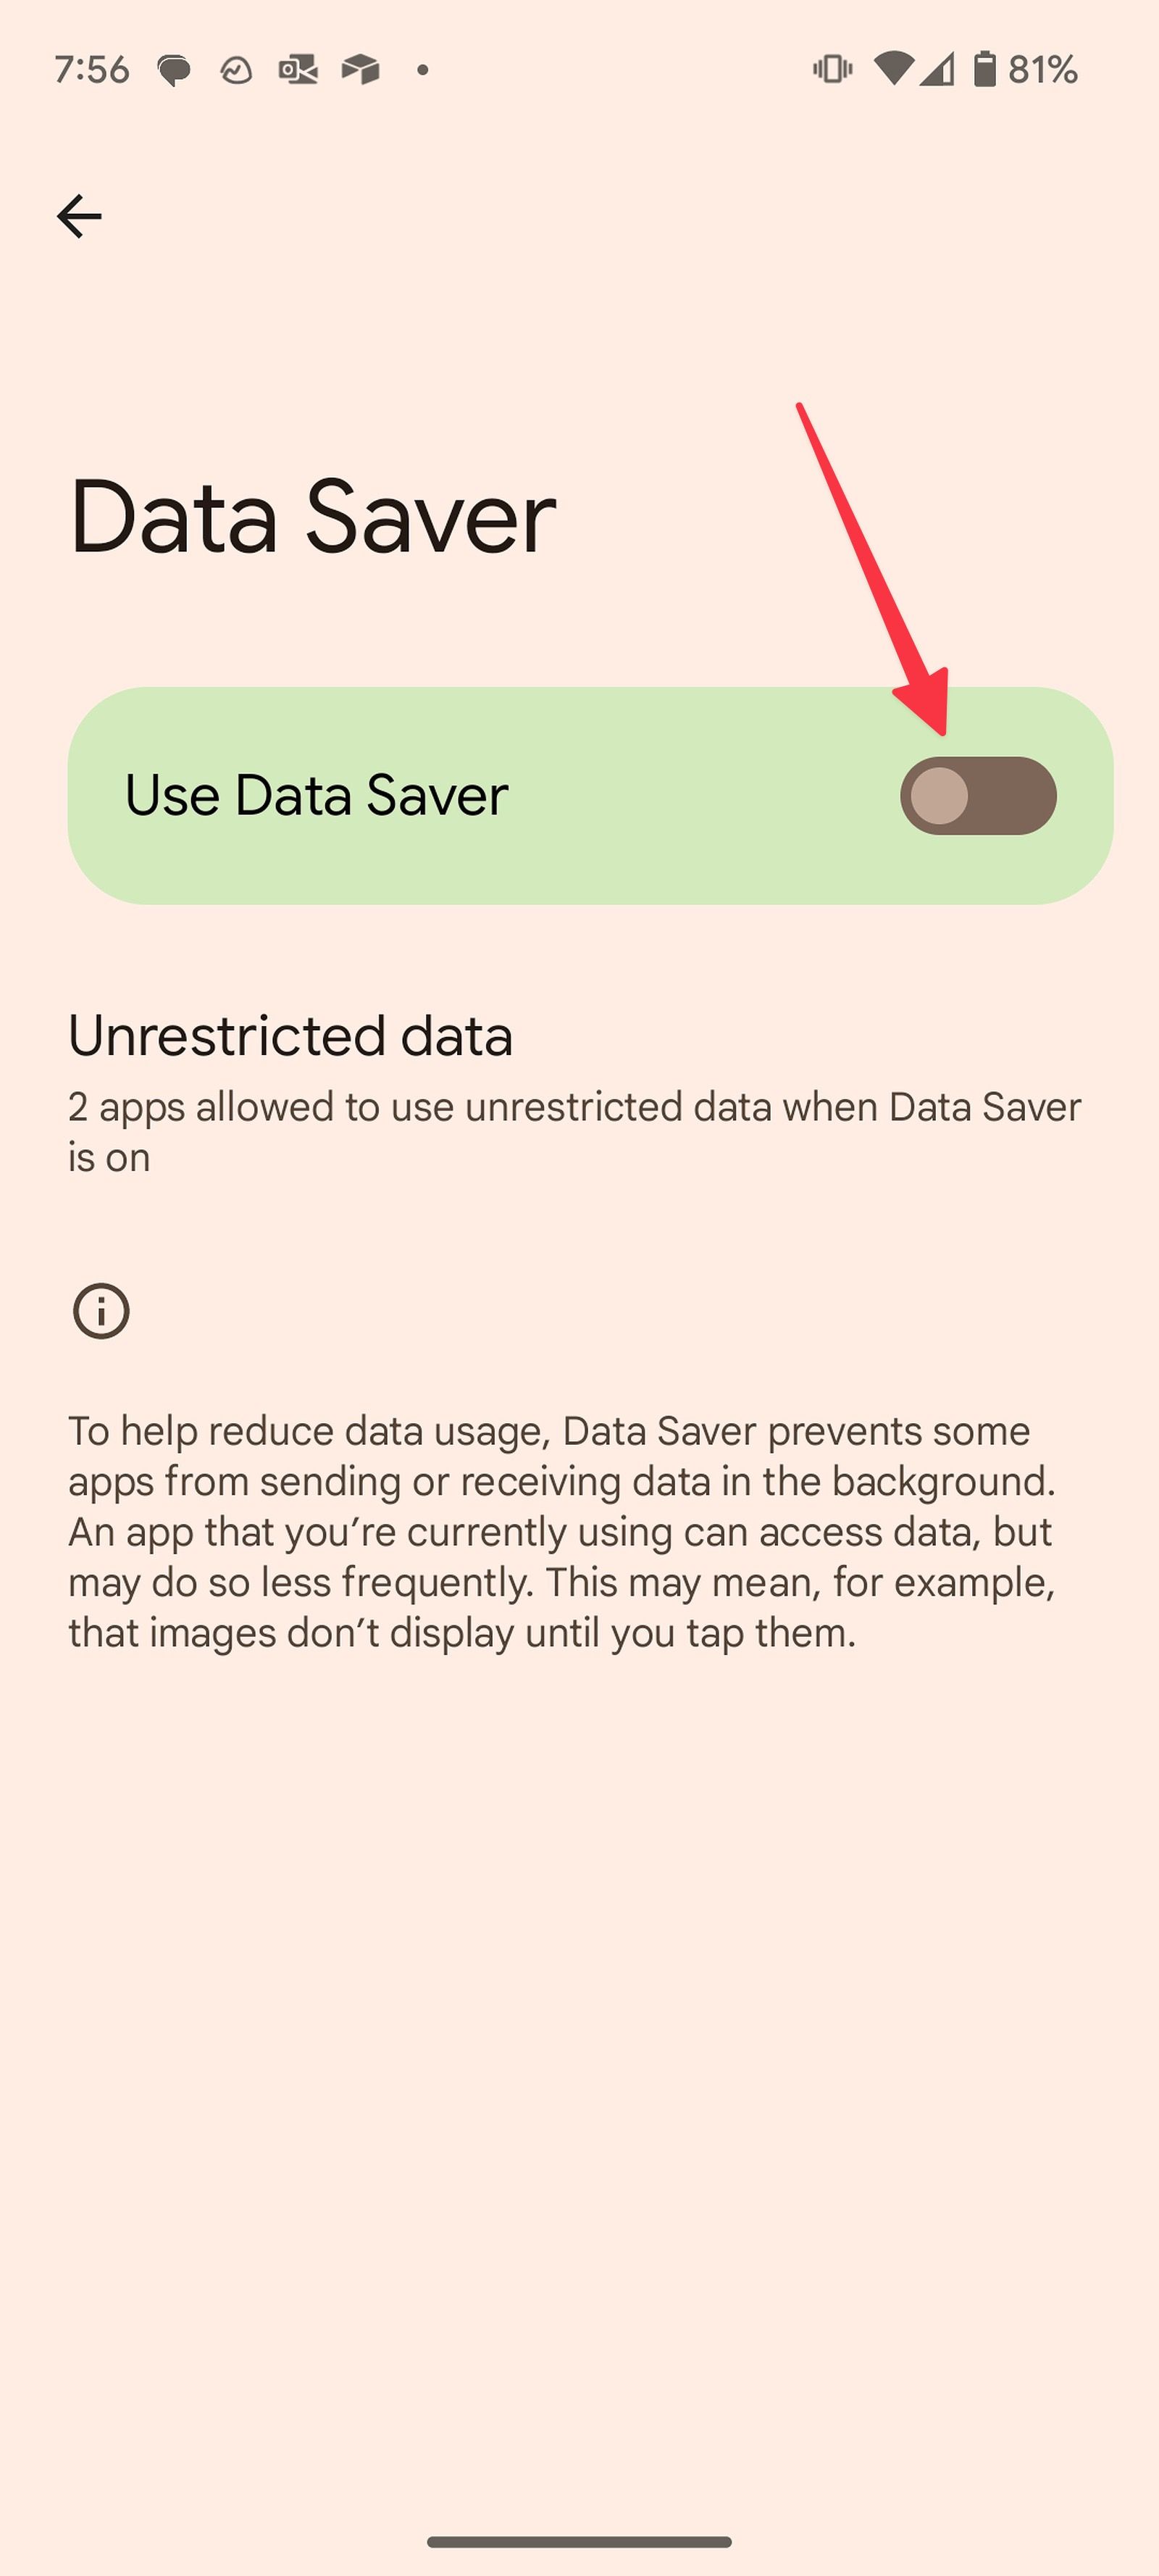 enable data saver on Android